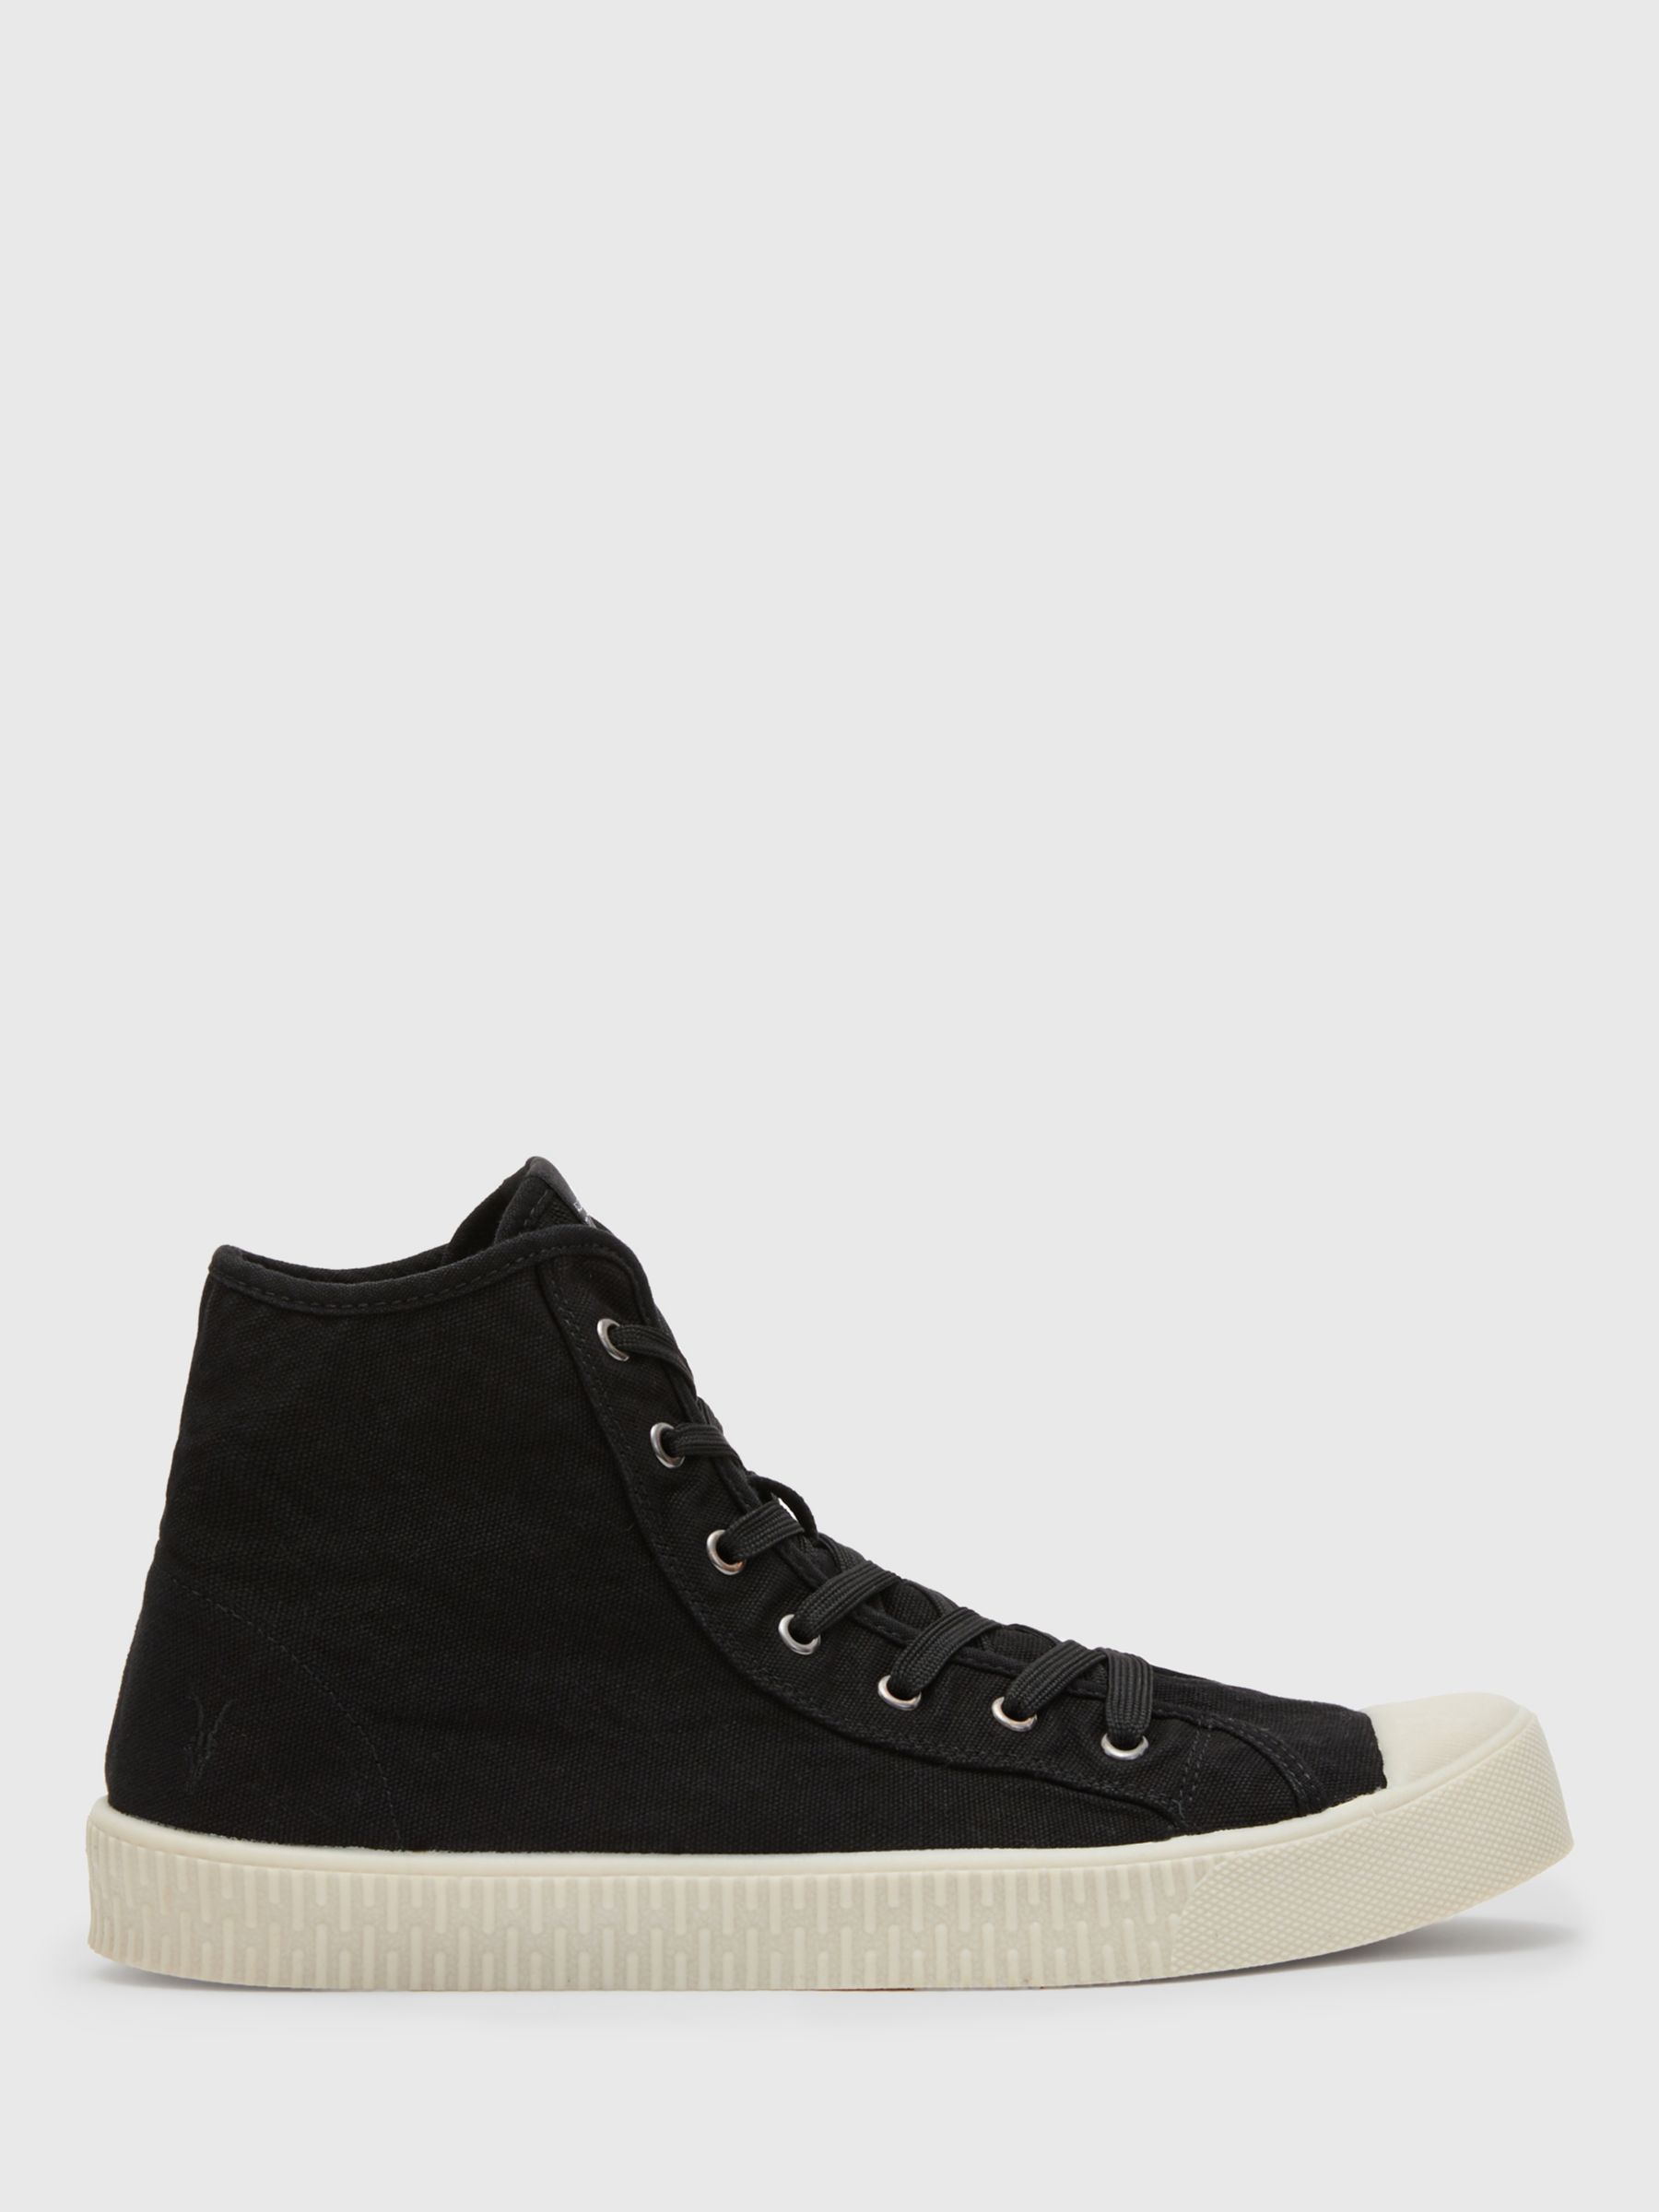 AllSaints Max High Top Trainers, Black at John Lewis & Partners